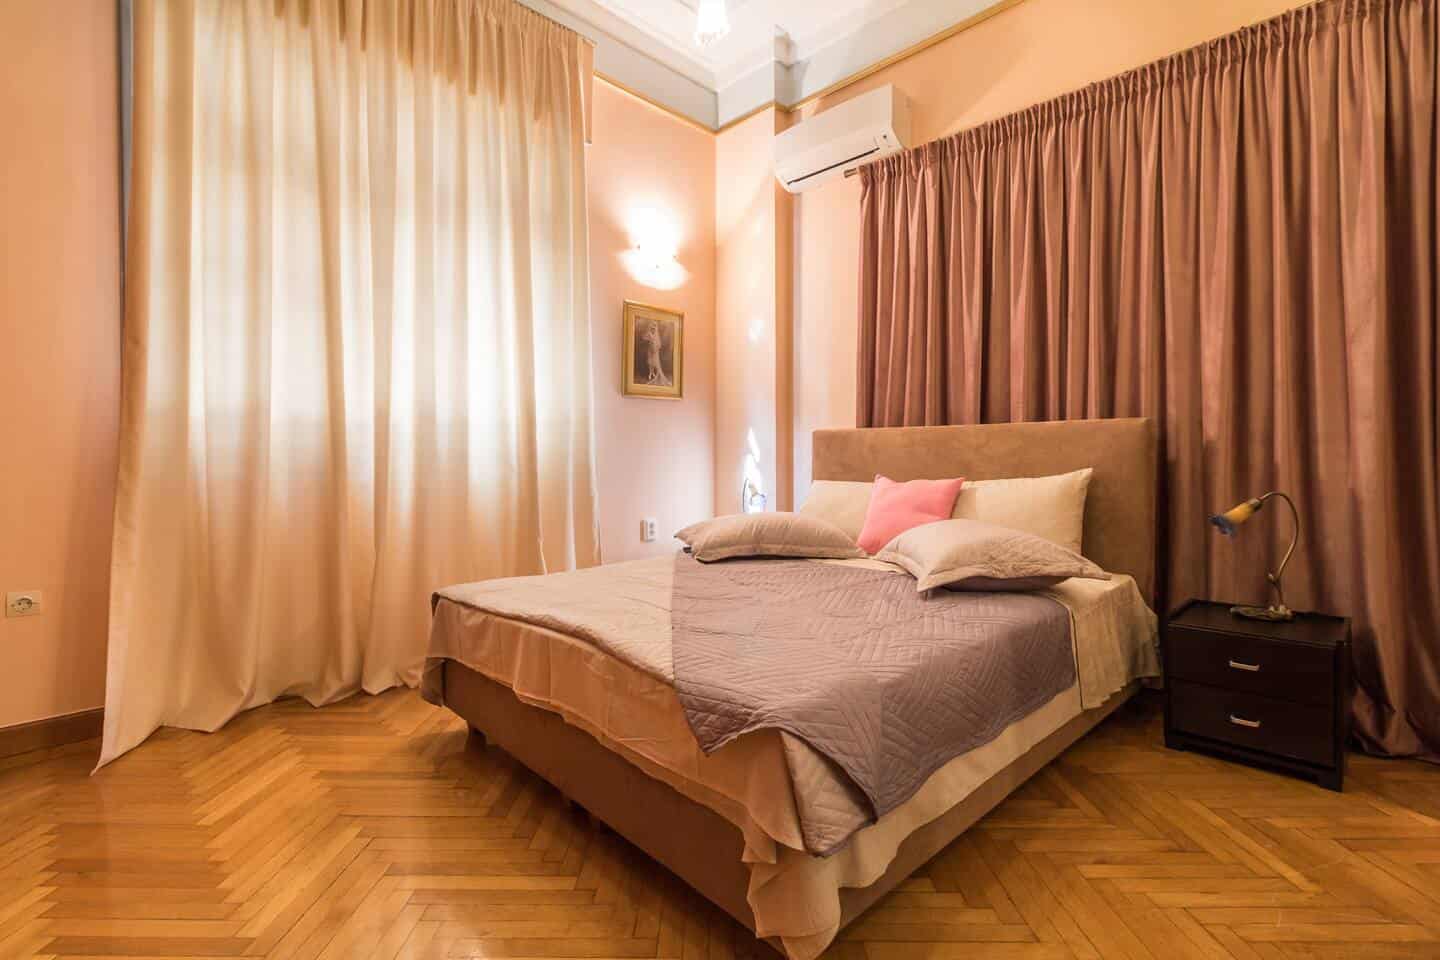 Image of Airbnb rental in Athens, Greece